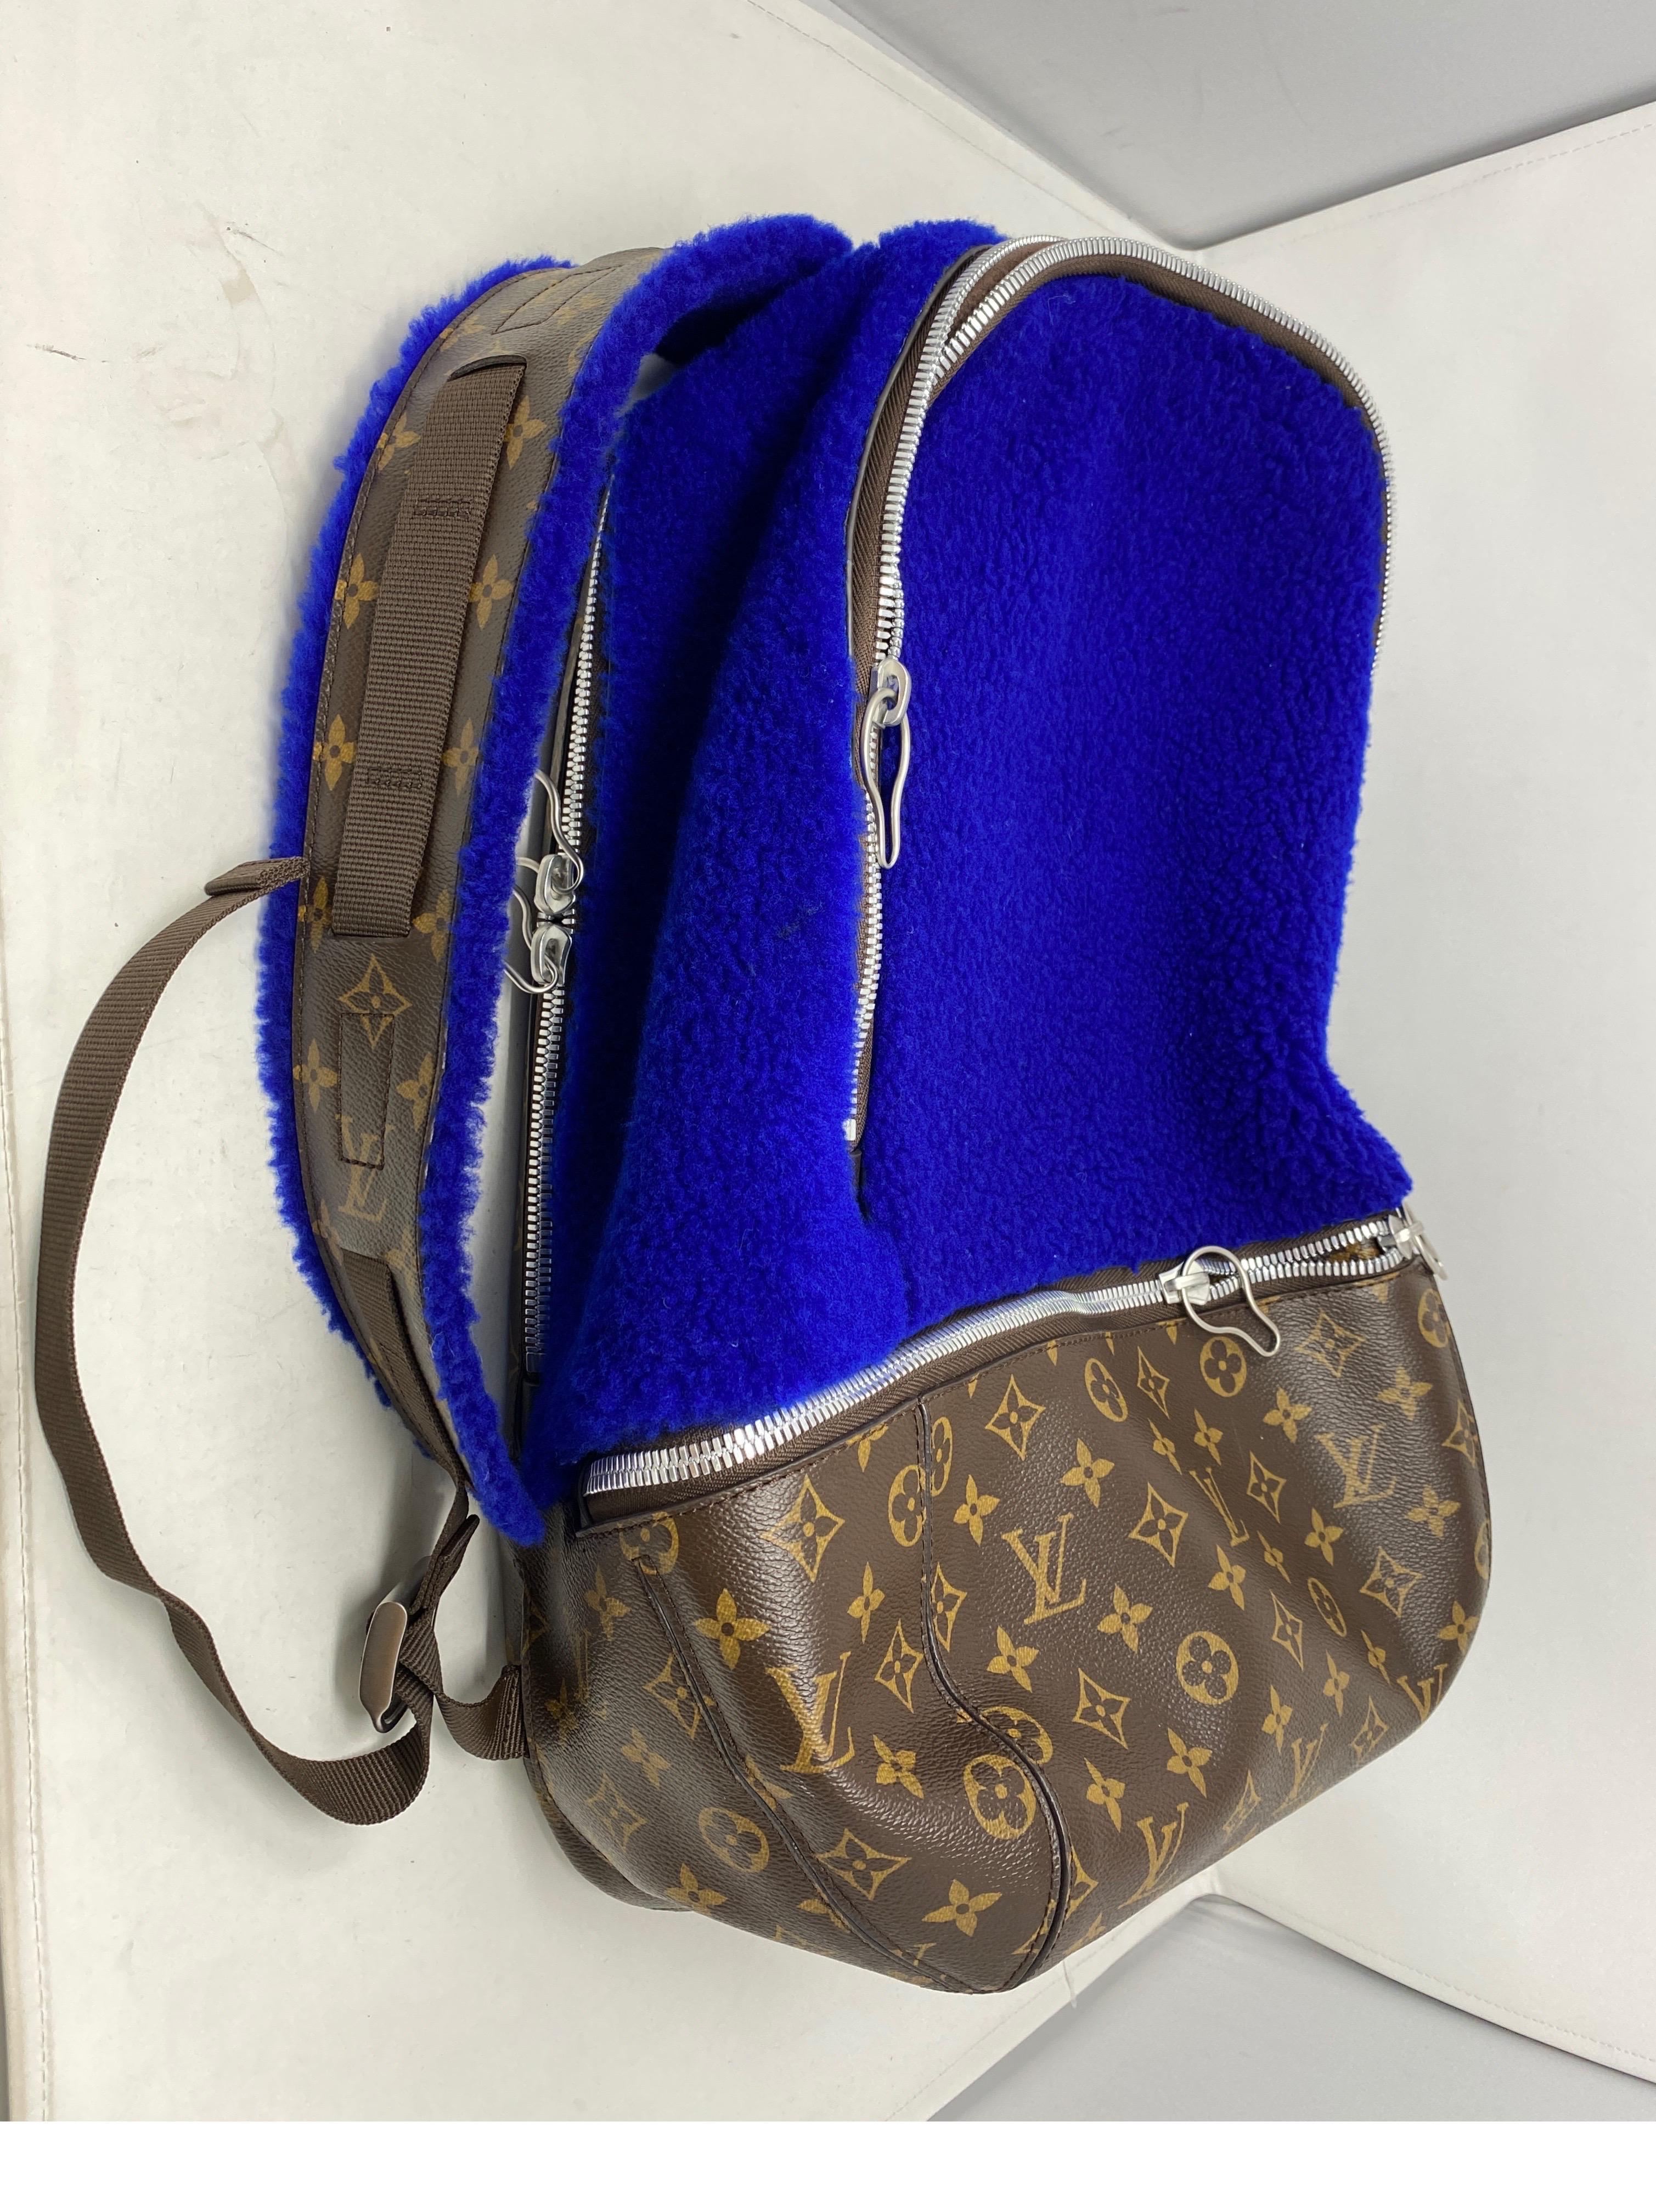 Louis Vuitton Marc Newson Blue Shearling and Monogram Backpack. Limited and rare. Collector's piece. Bright blue shearling fur and monogram canvas. Silver hardware. Excellent like new condition. Guaranteed authentic. 